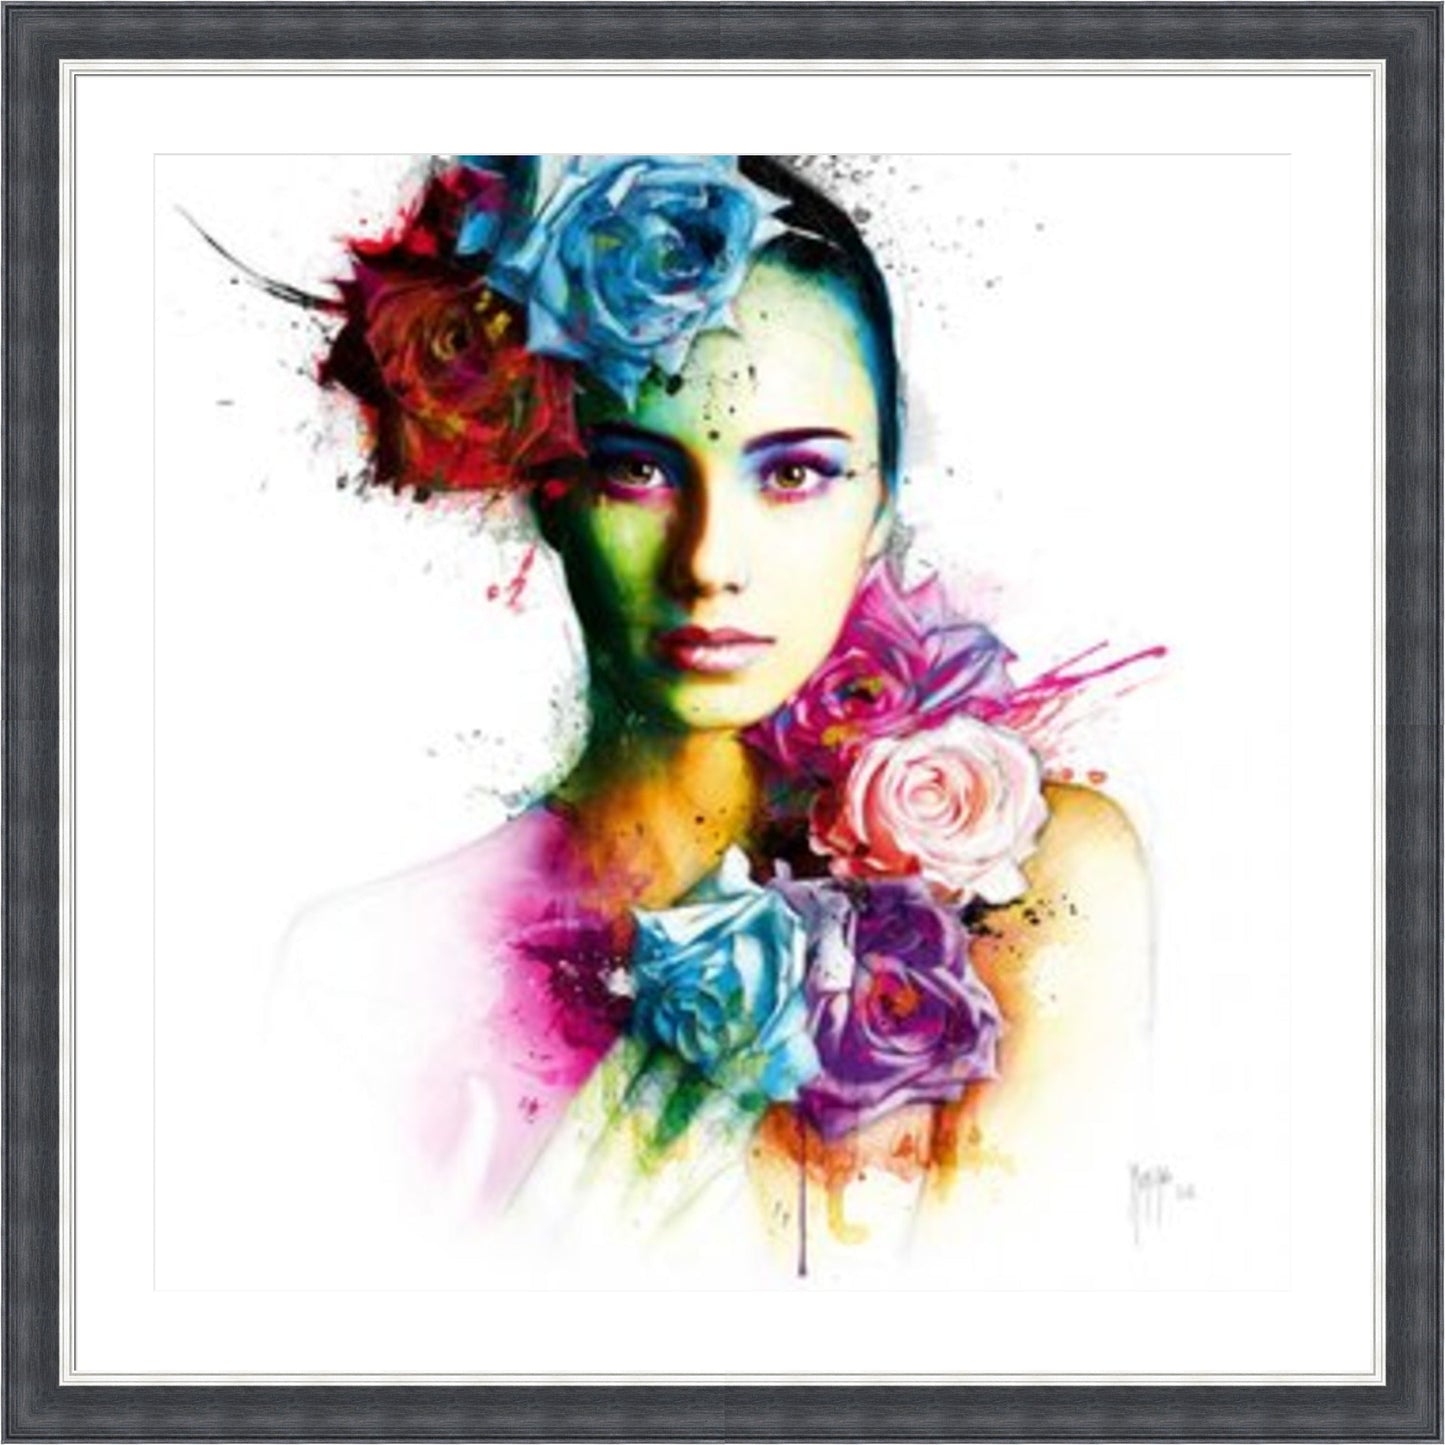 Ambre (Flower Girl) by Patrice Murciano